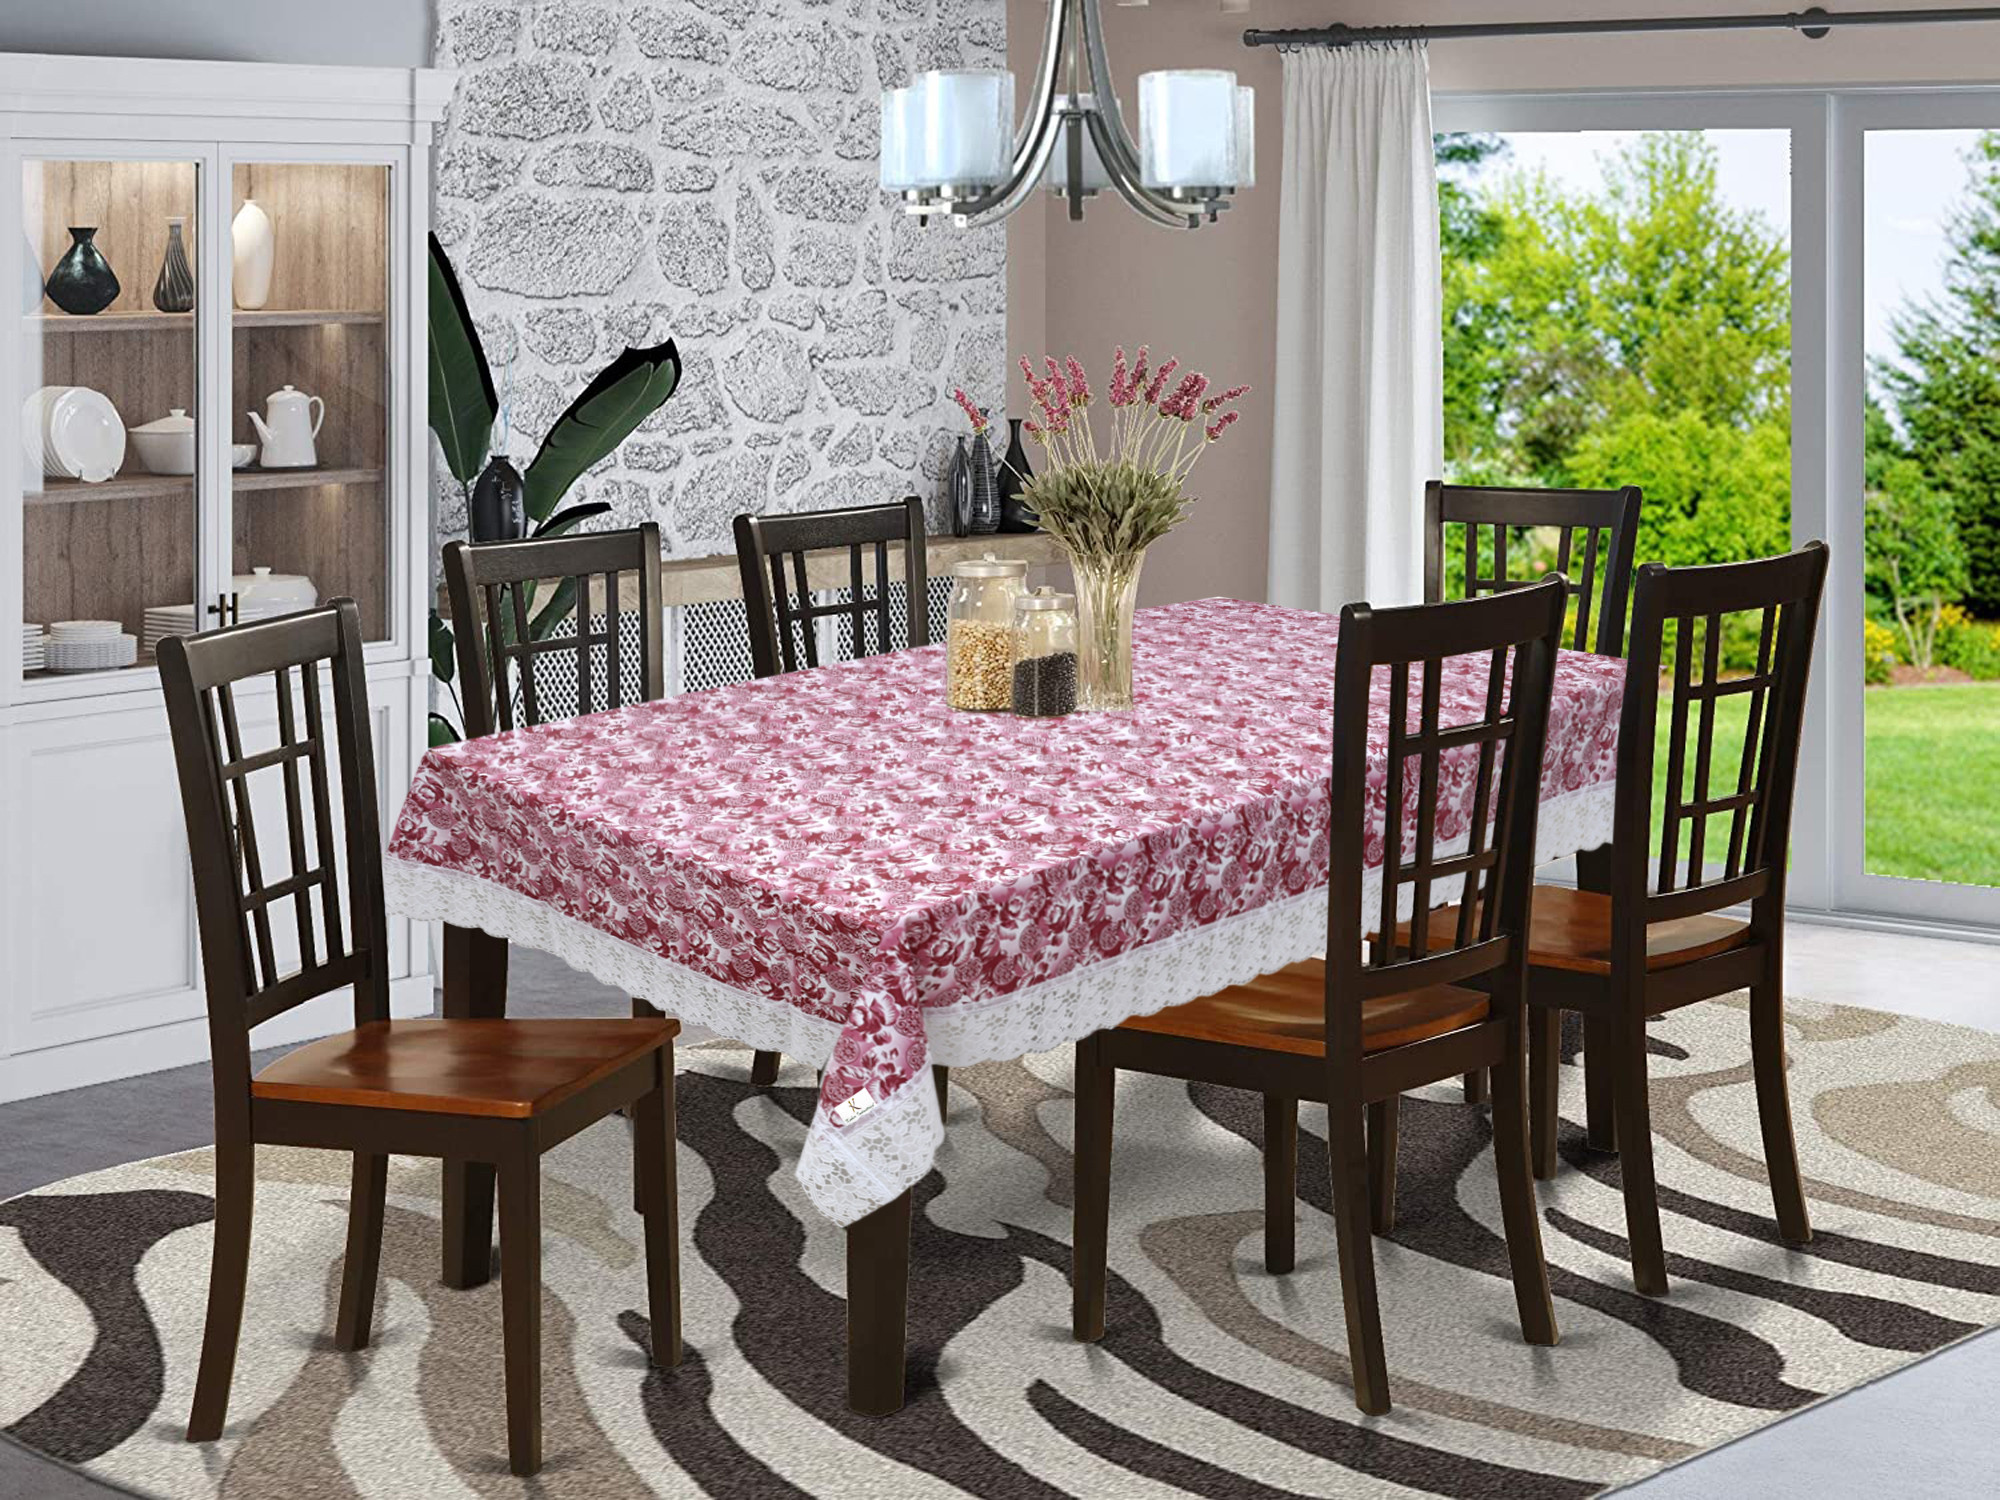 Kuber Industries Rose Print PVC 6 Seater Dining Table Cover 60